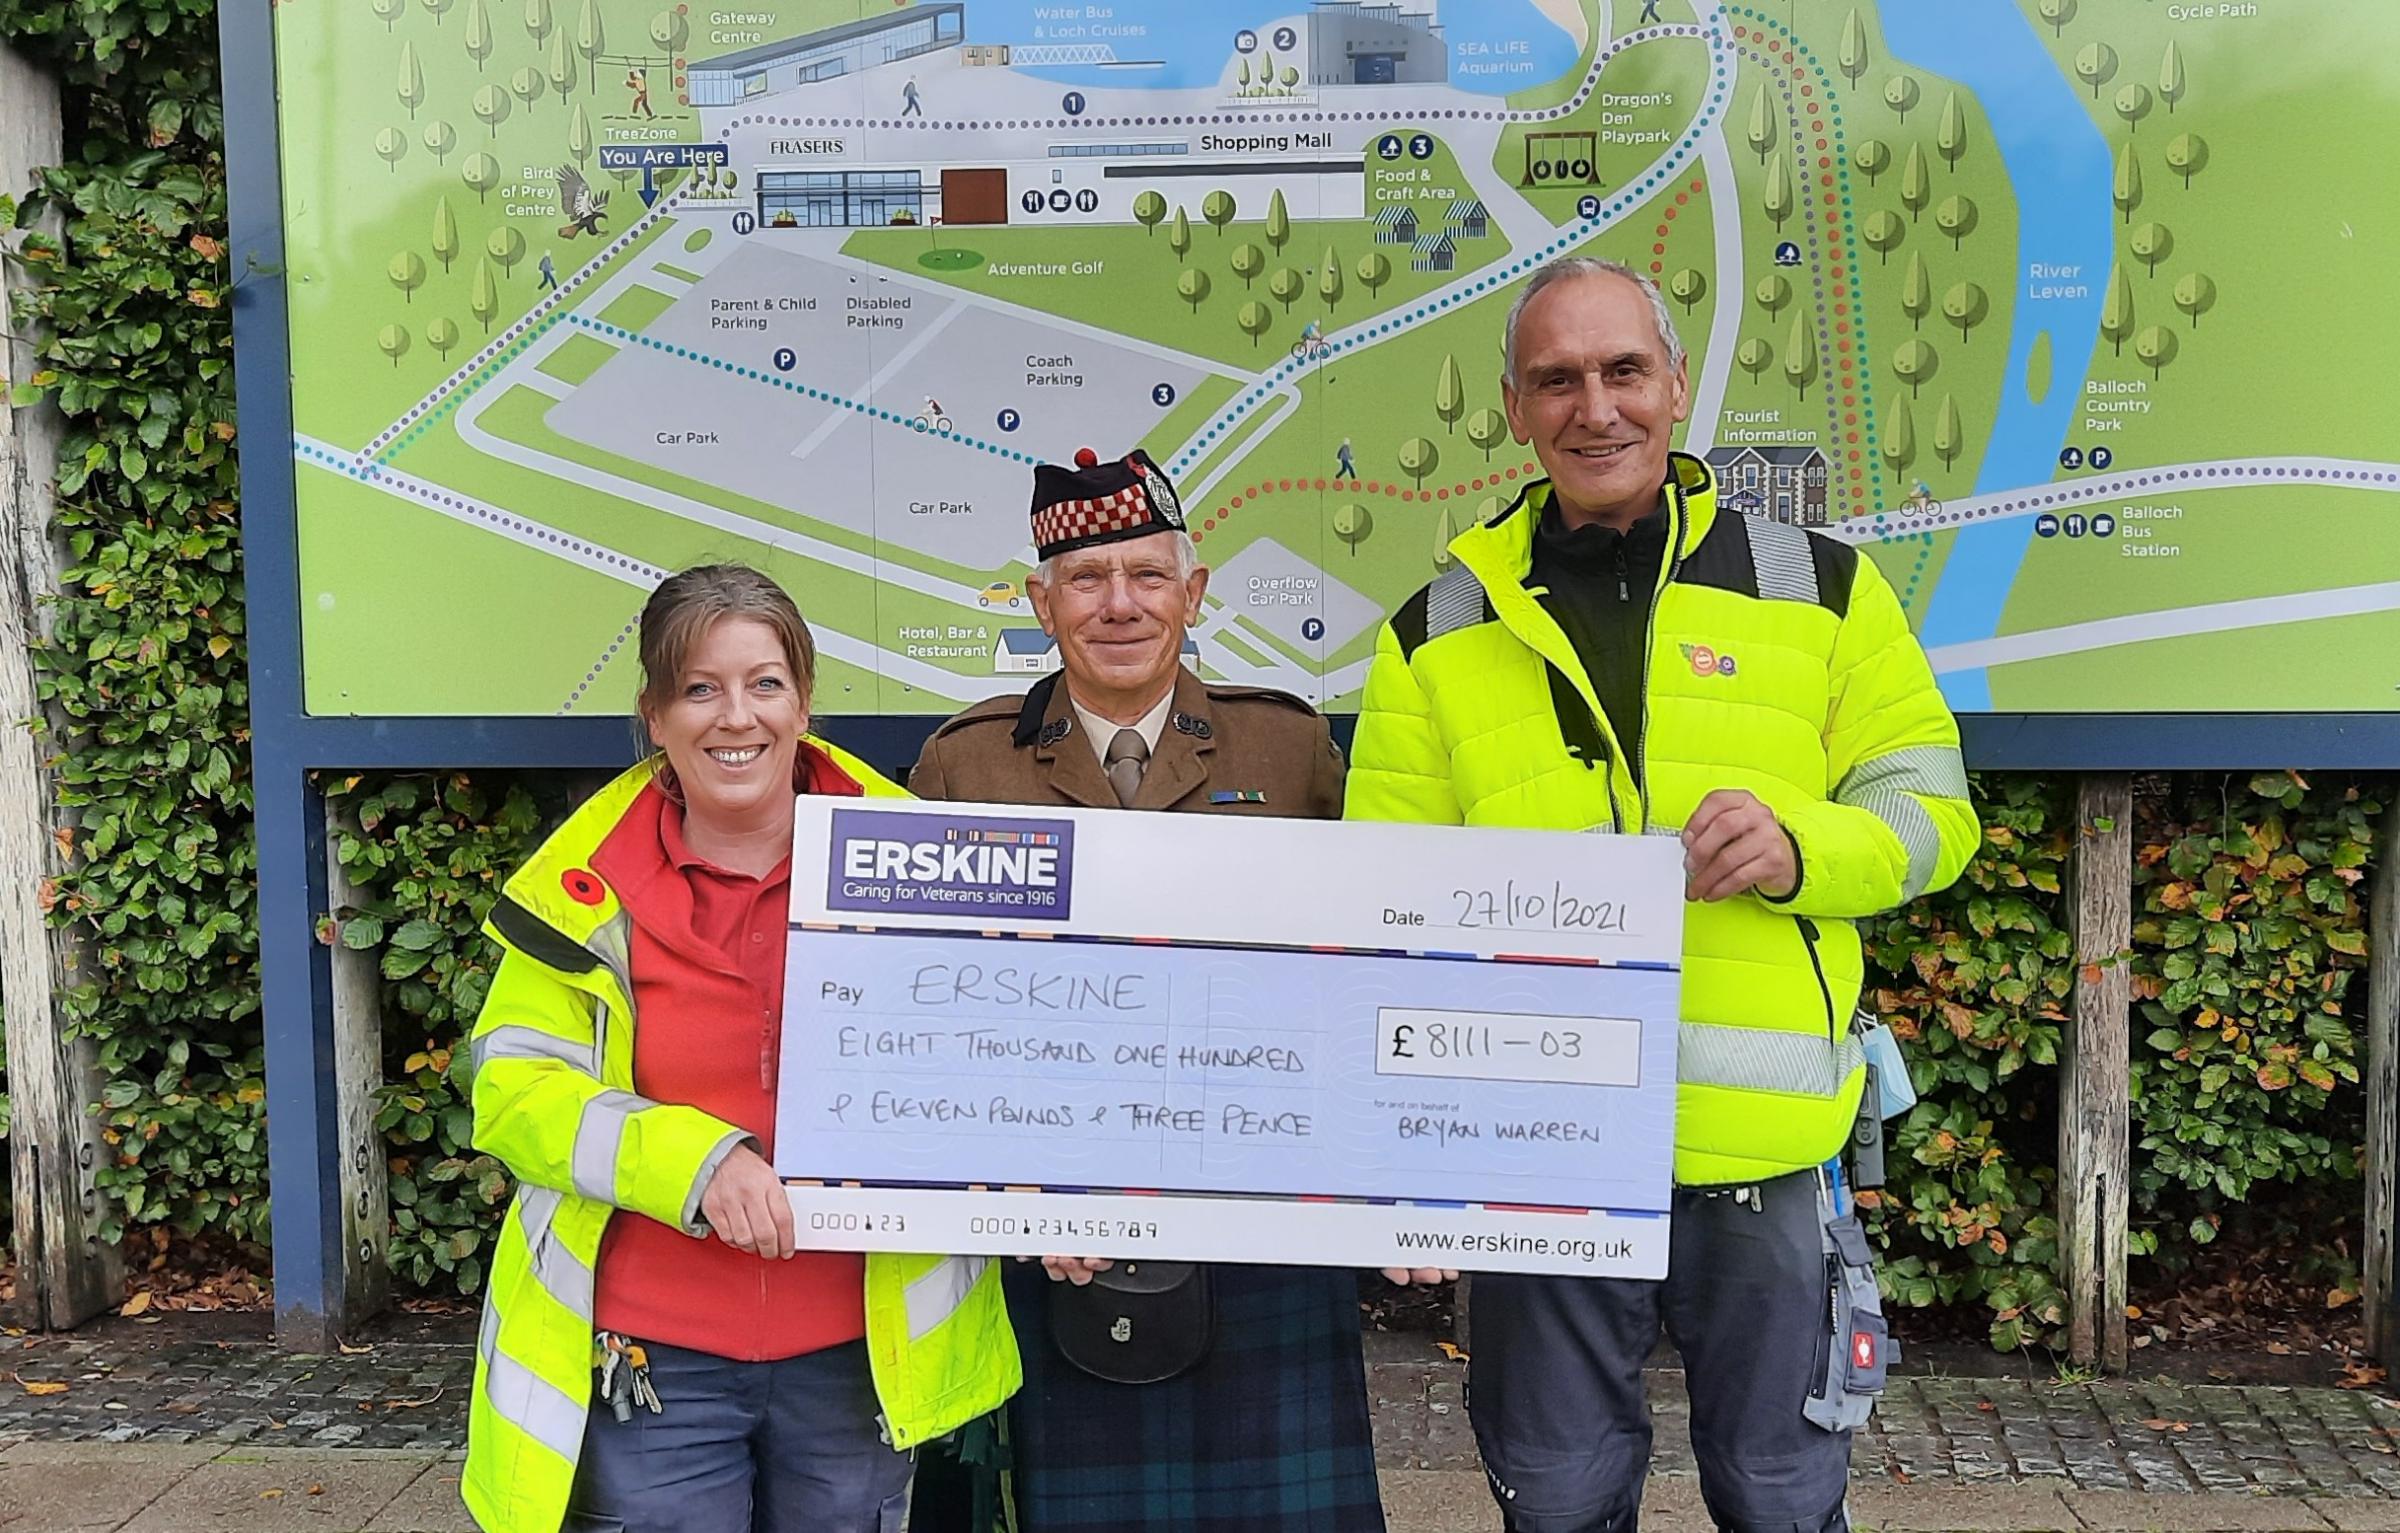 Erskine charity receives' £8,000 from Loch Lomond Shores fund-raising bagpiper